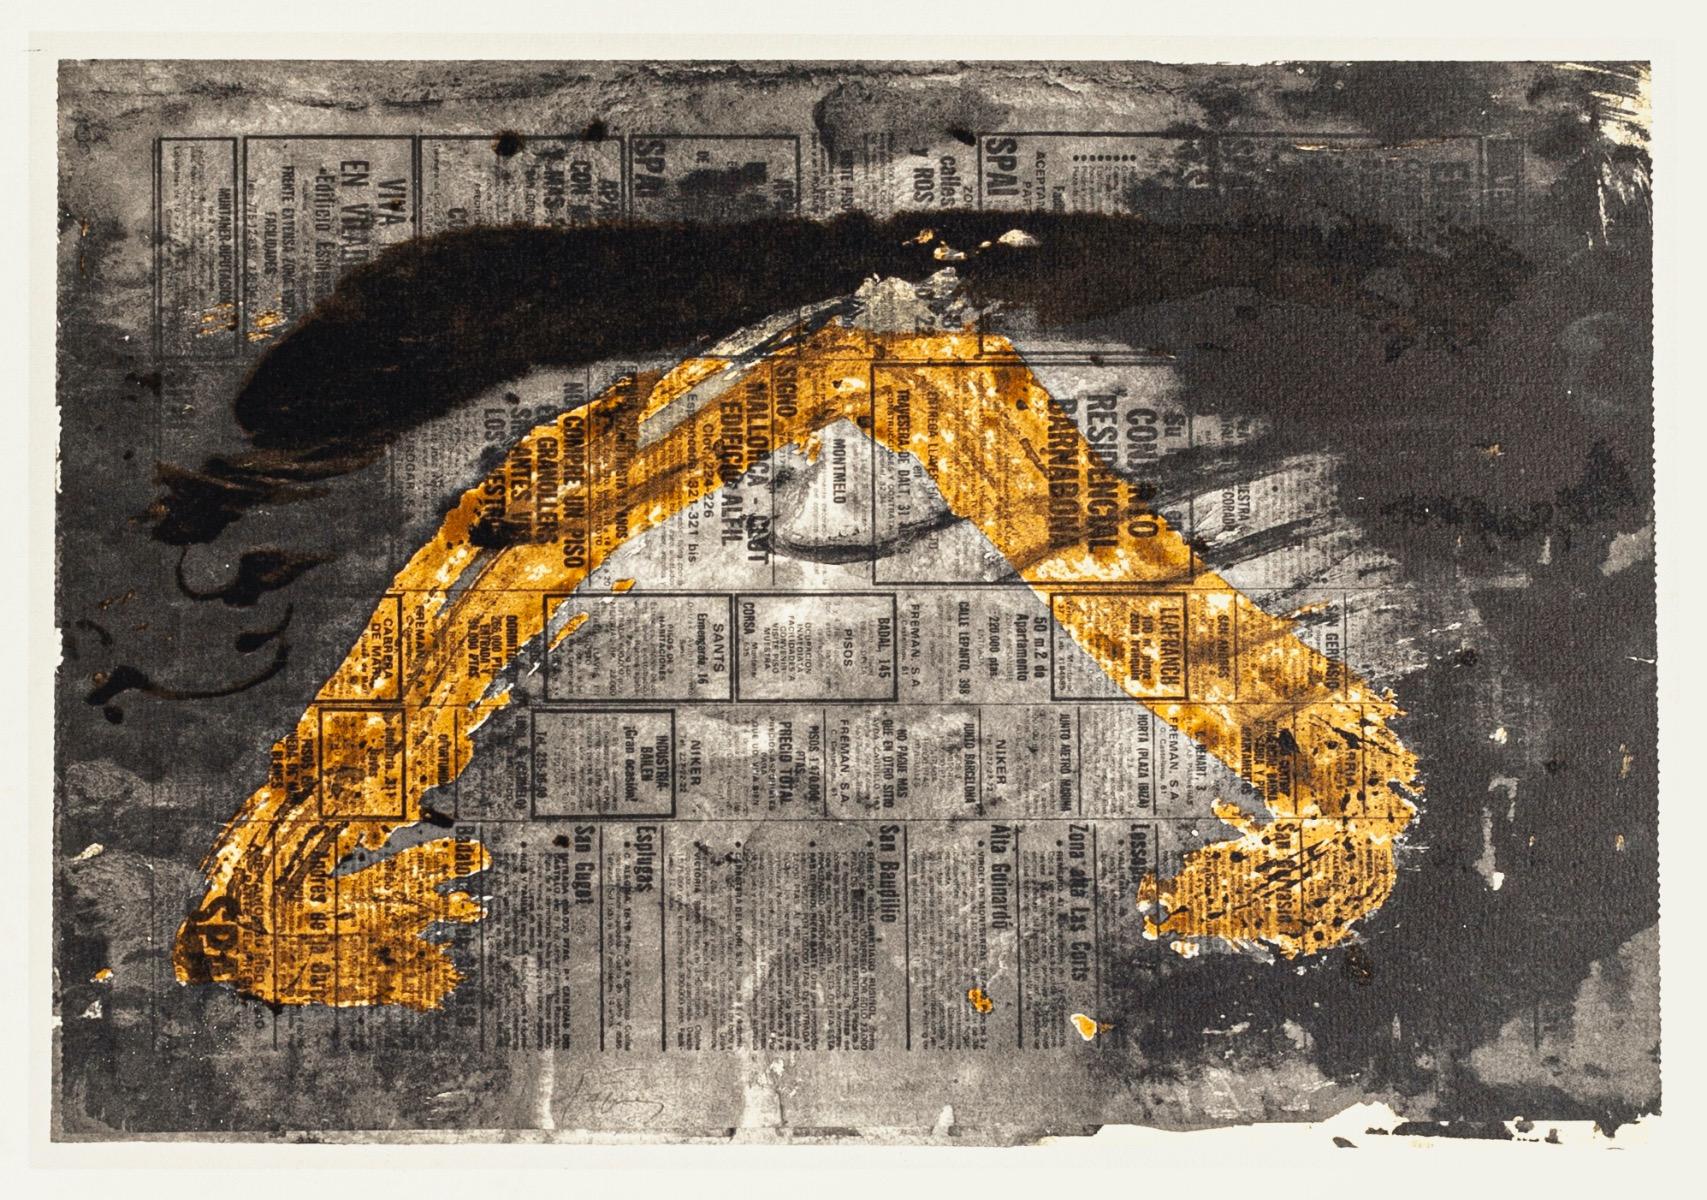 Antoni Tàpies (after) Abstract Print - White Angle - Vintage Offset Print after Antoni Tàpies - 1982